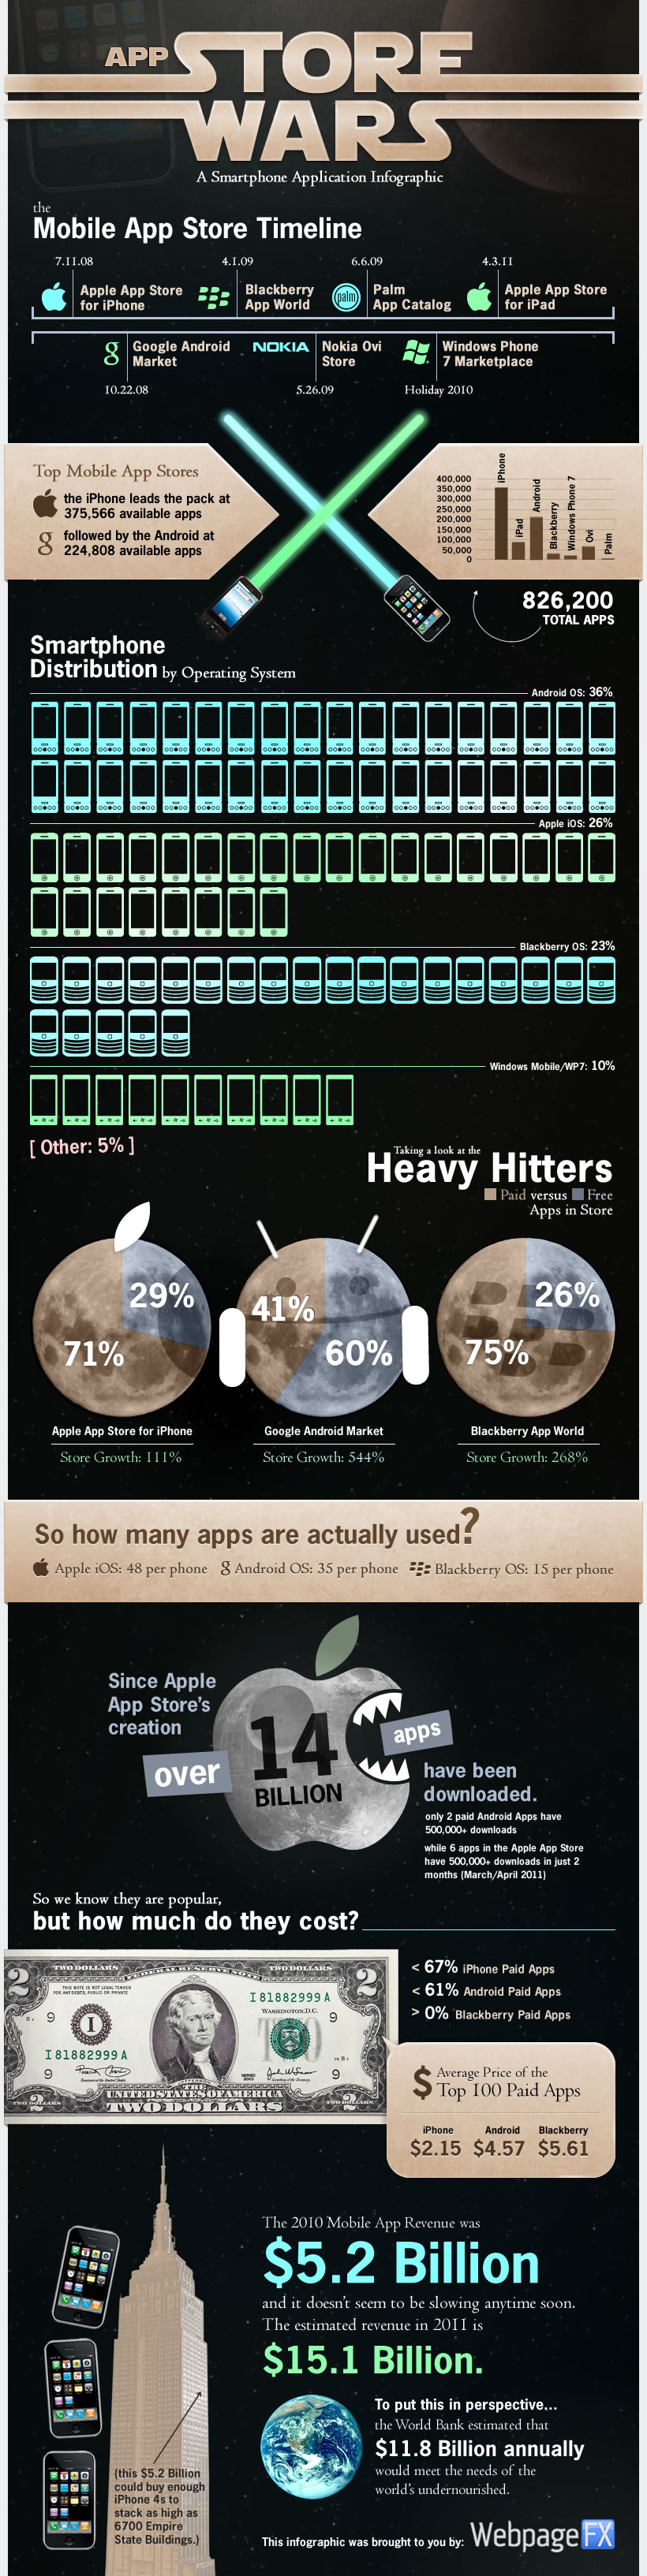 statistiques applications mobiles